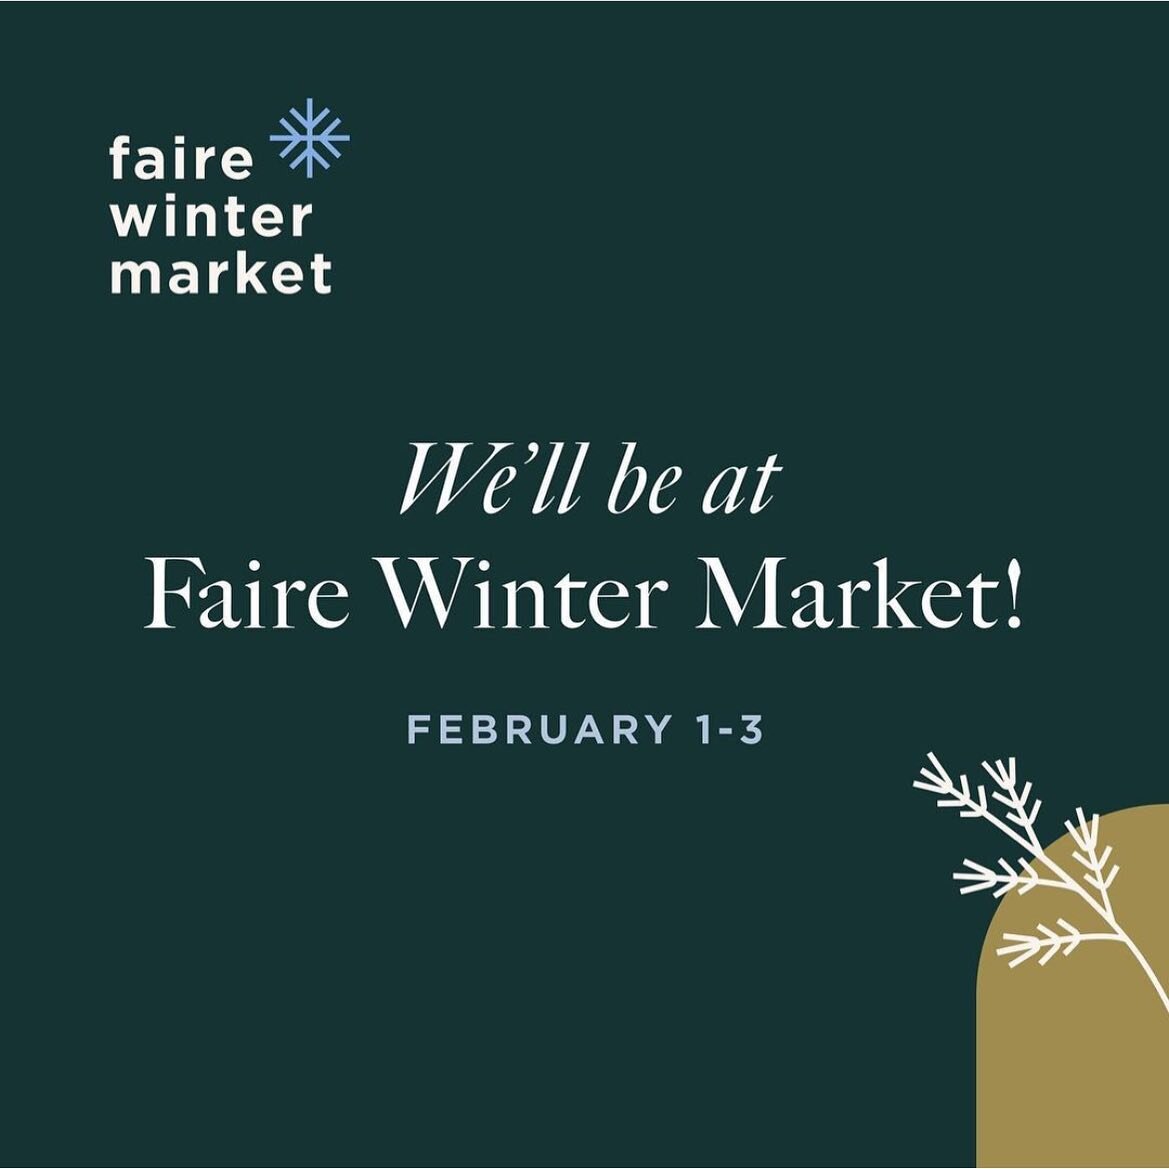 20% + Free Shipping on wholesale orders! The @faire_wholesale Winter Market starts tomorrow. Feb 1-3. All my new products will be ready to go in my Faire shop. 💌